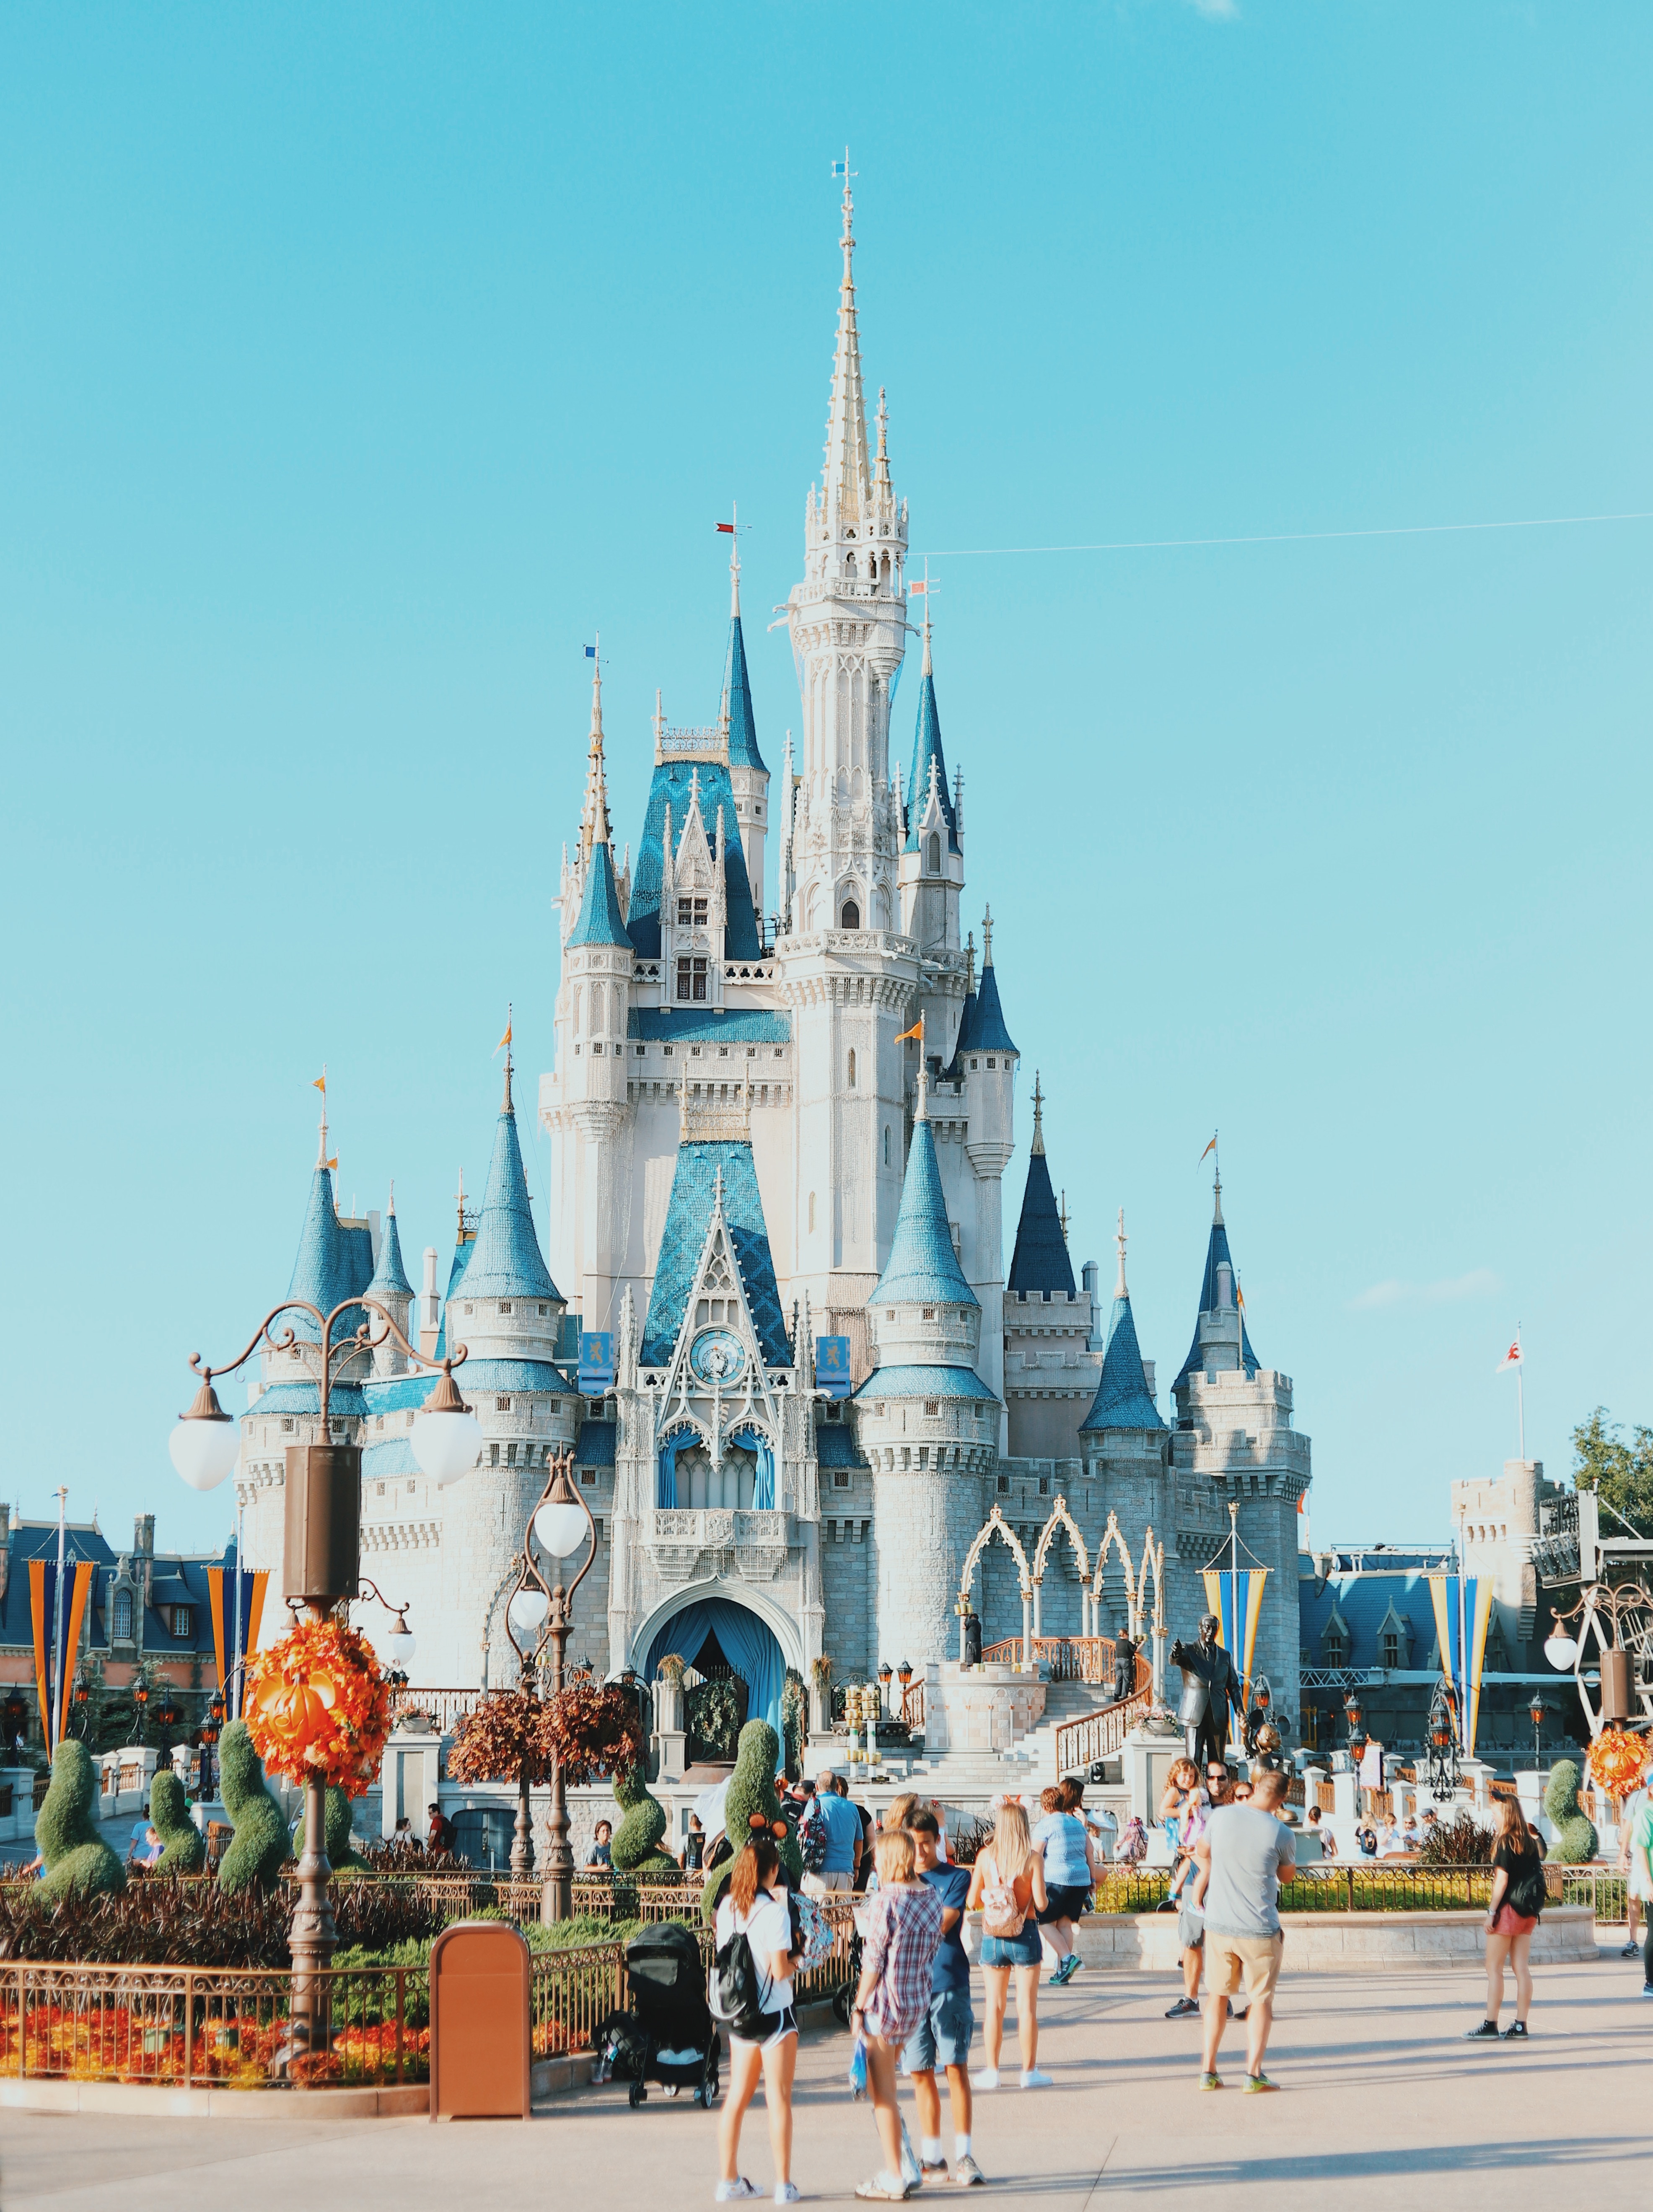 7 Tips to Help You Save at Disney World